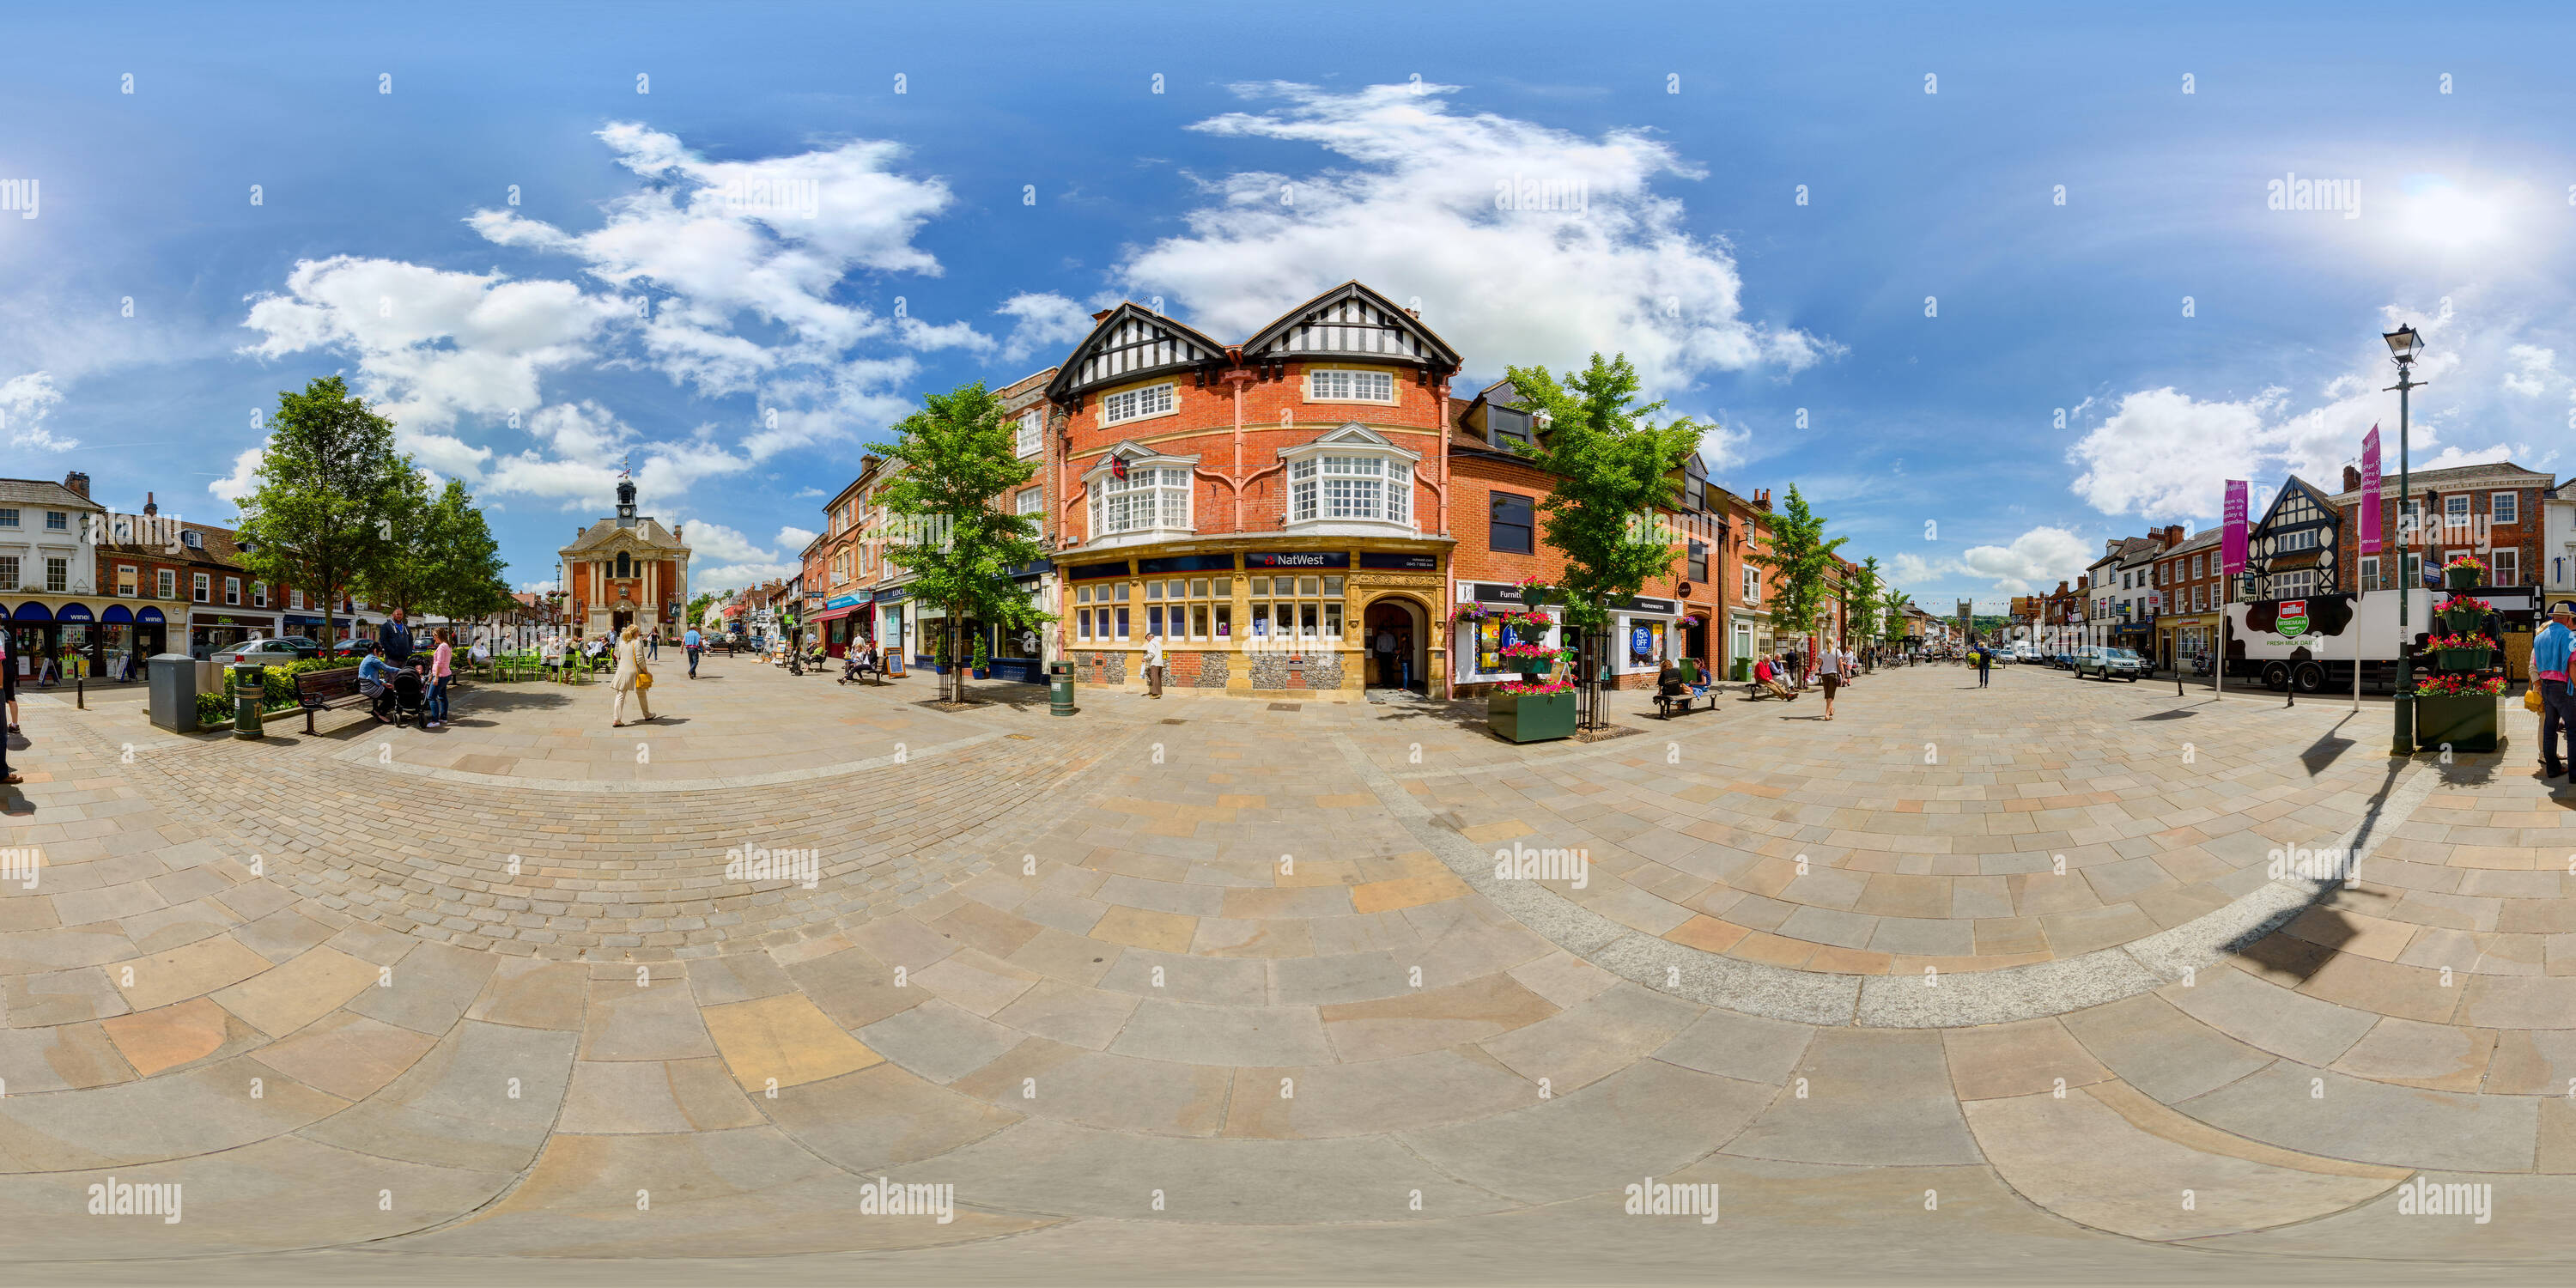 360 degree panoramic view of Henley on Thames Market Town, Oxfordshire, UK